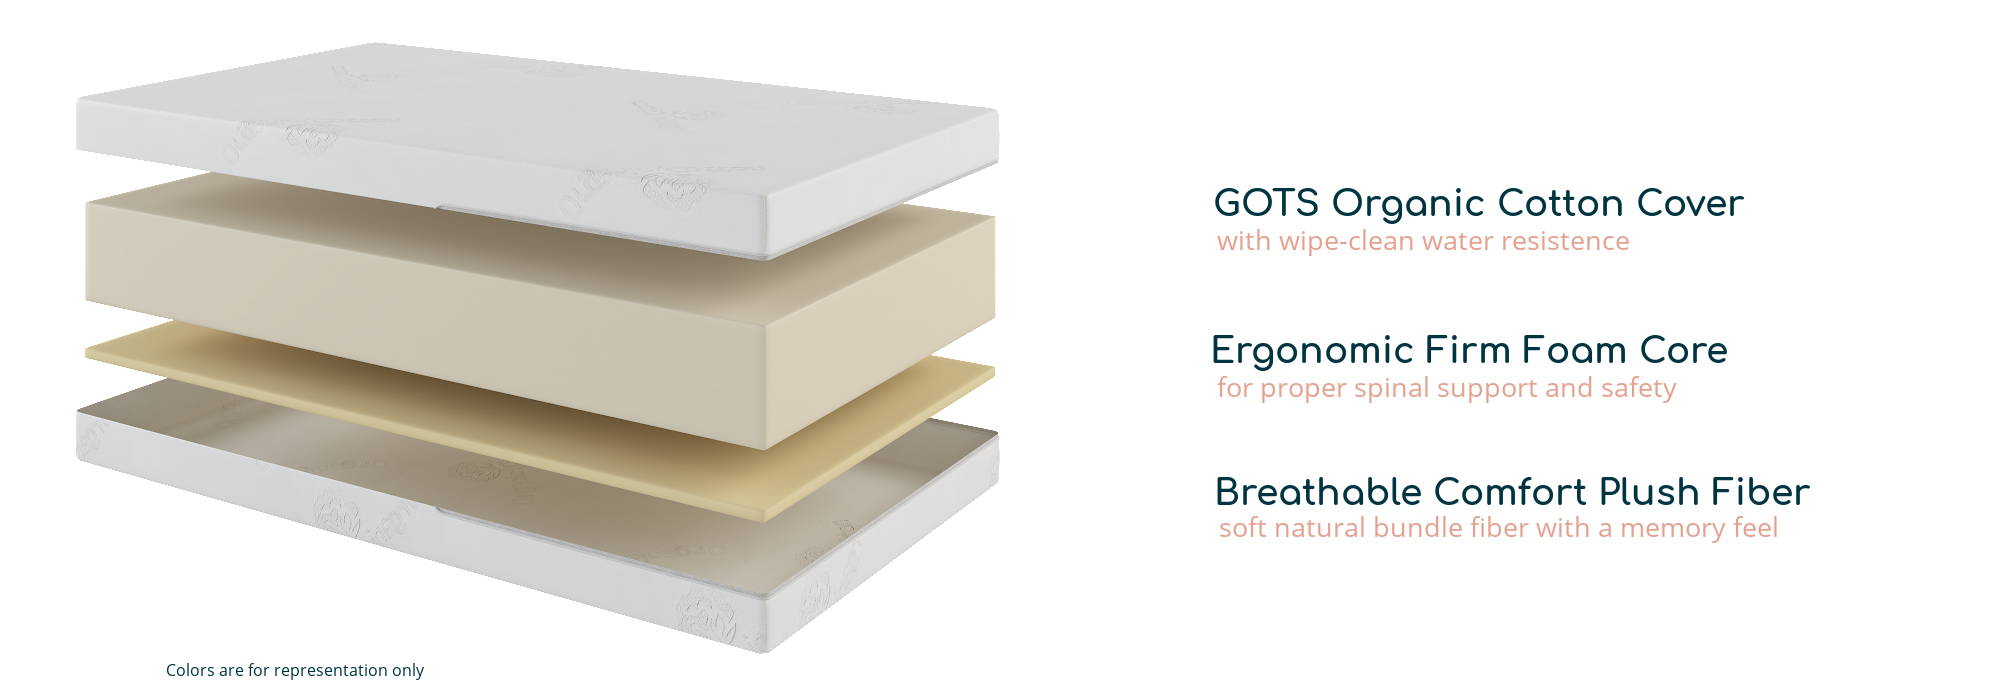 GOTS Organic Cotton Cover-with wipe clean resistance, Ergonomic Firm Foam Core-for proper spinal support and safety, and Breathable Comfort Plush Fiber-soft natura bundle fiber with a memory feel for the toddler side. 